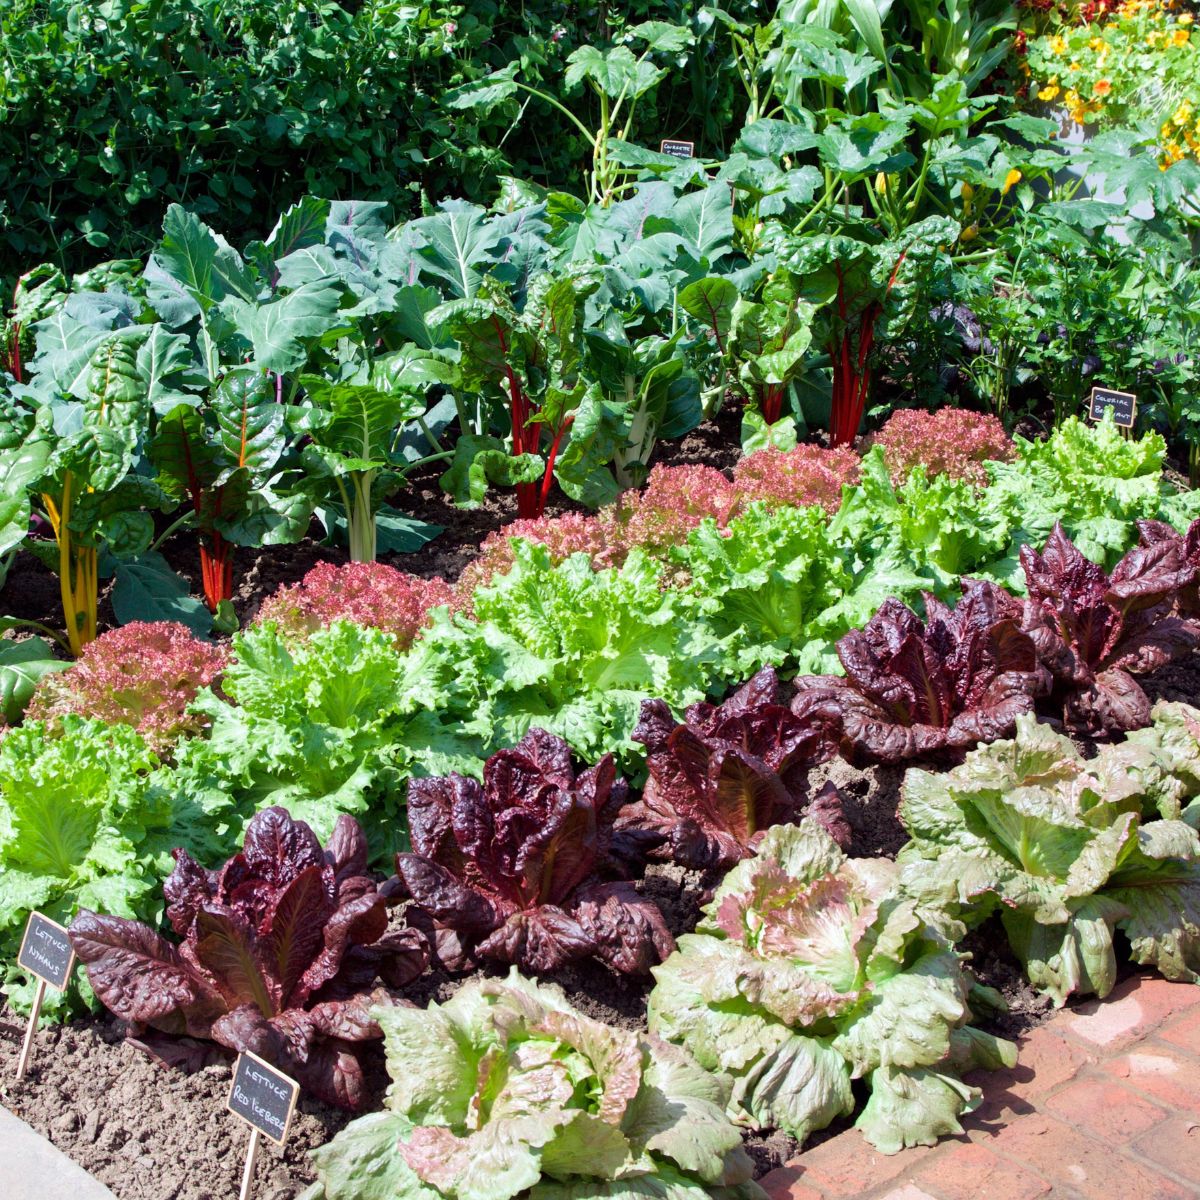 _Best tips to have a thriving vegetable patch at home on Thursd